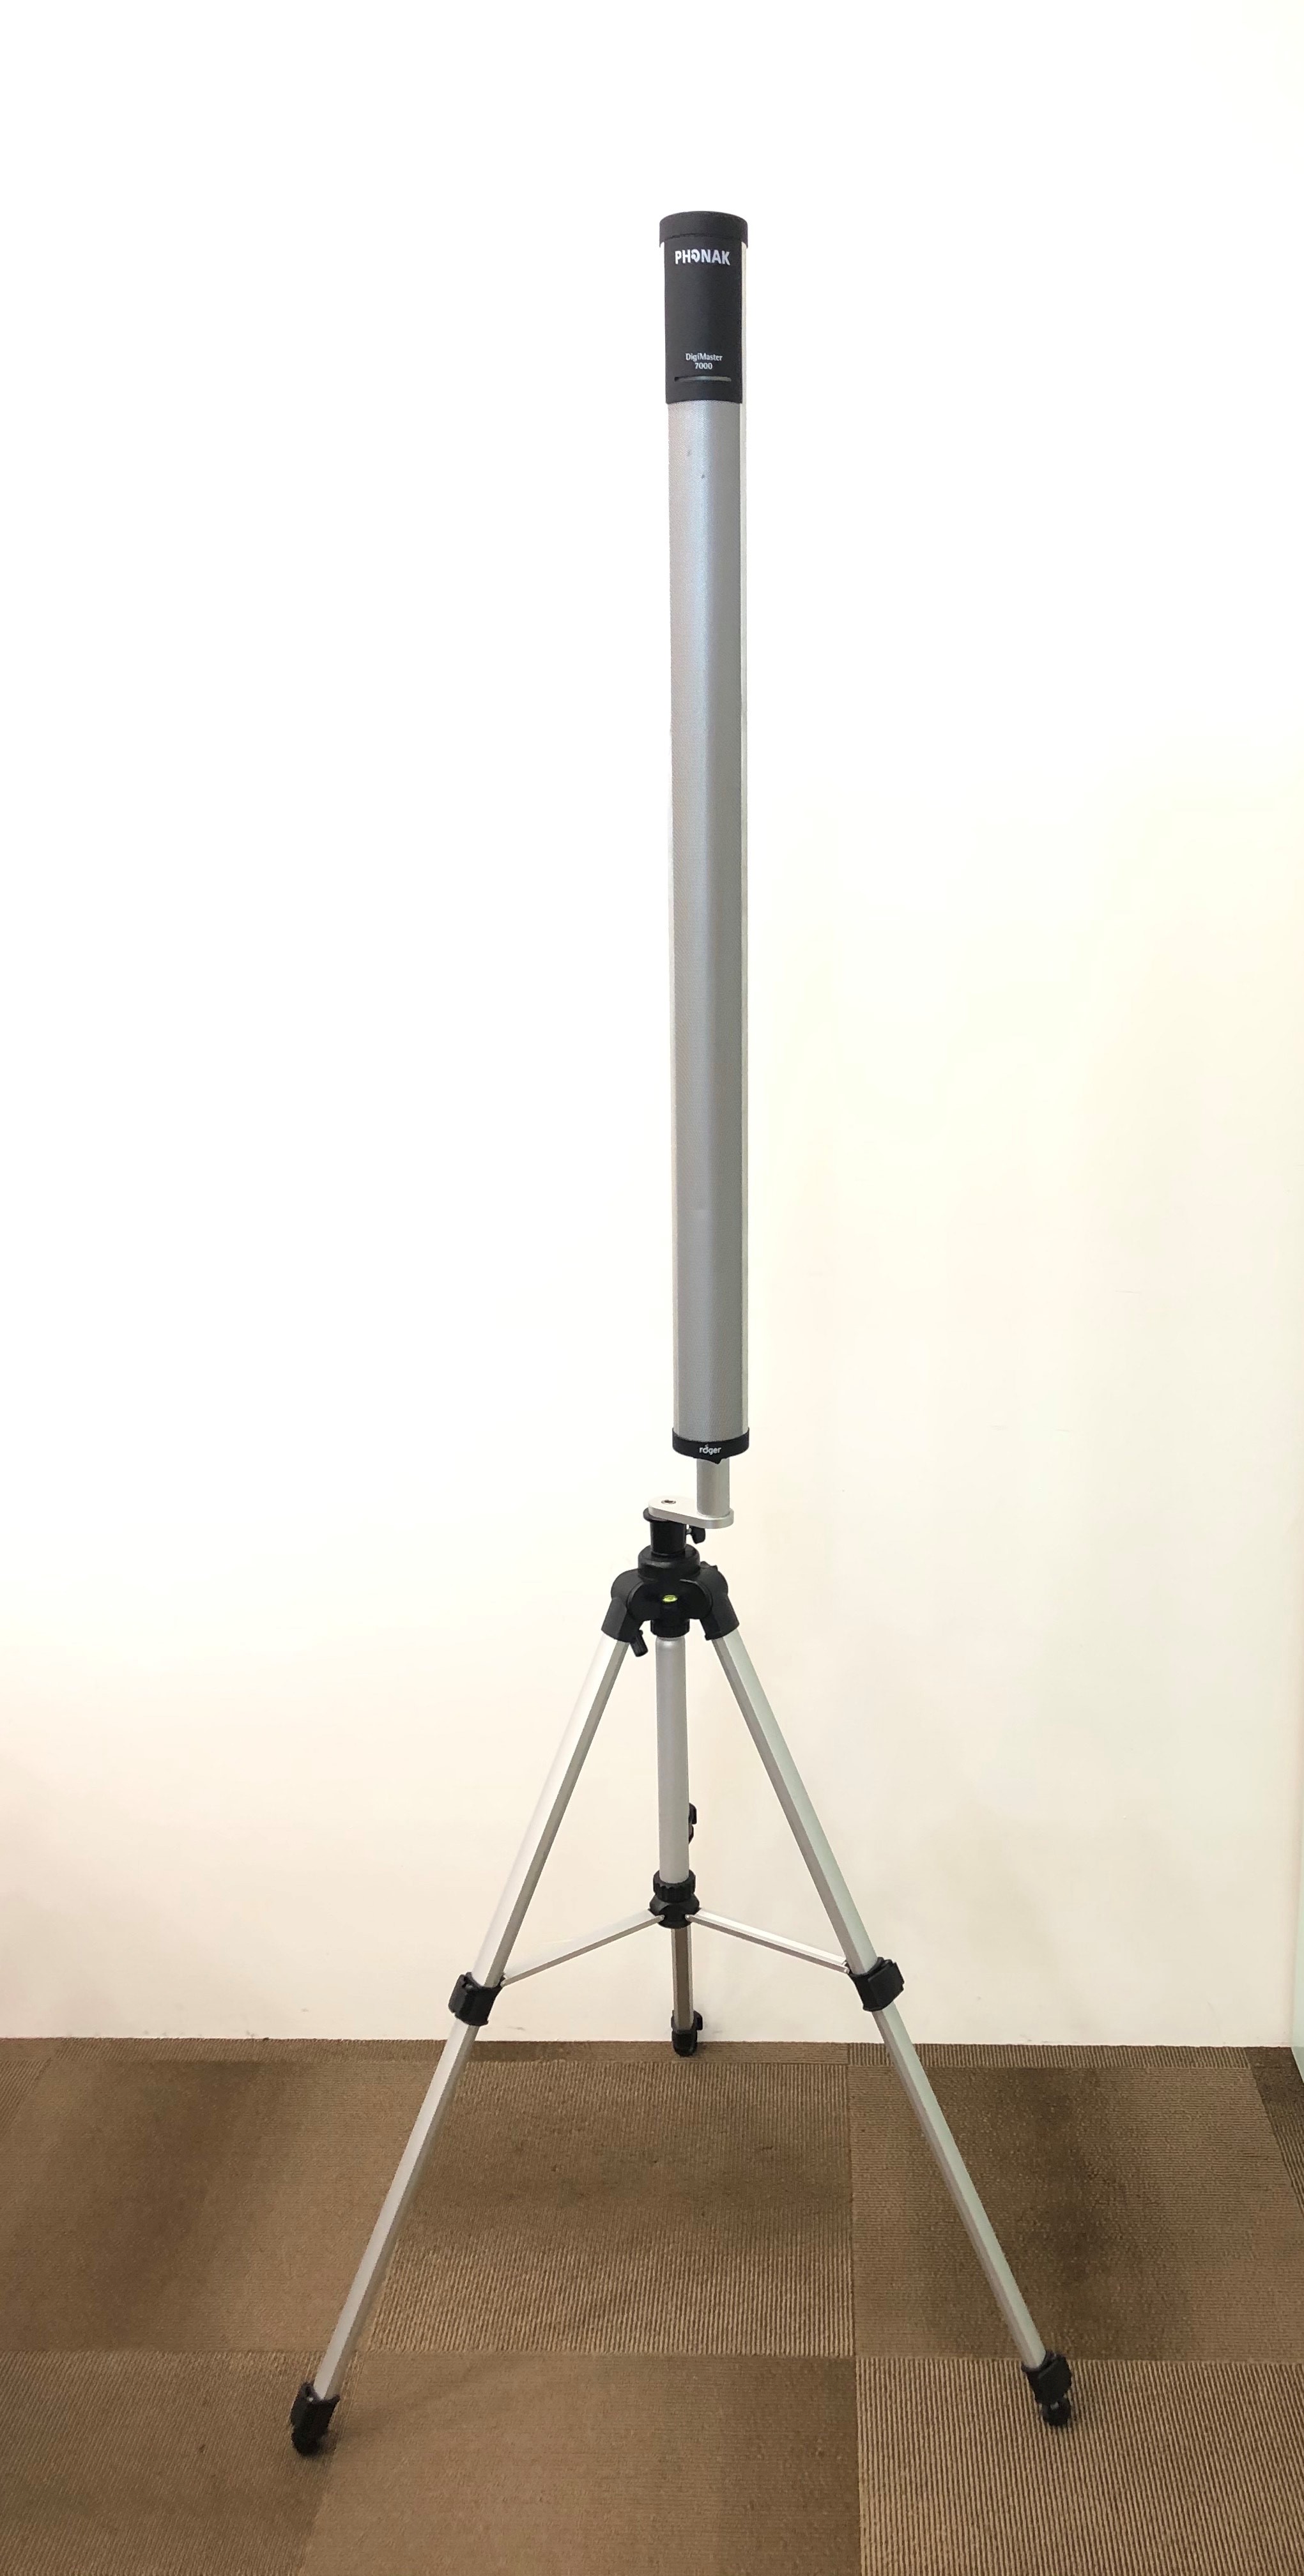 Image of the Phonak Roger DigiMaster 7000 Soundfield Speaker on Tripod Stand.